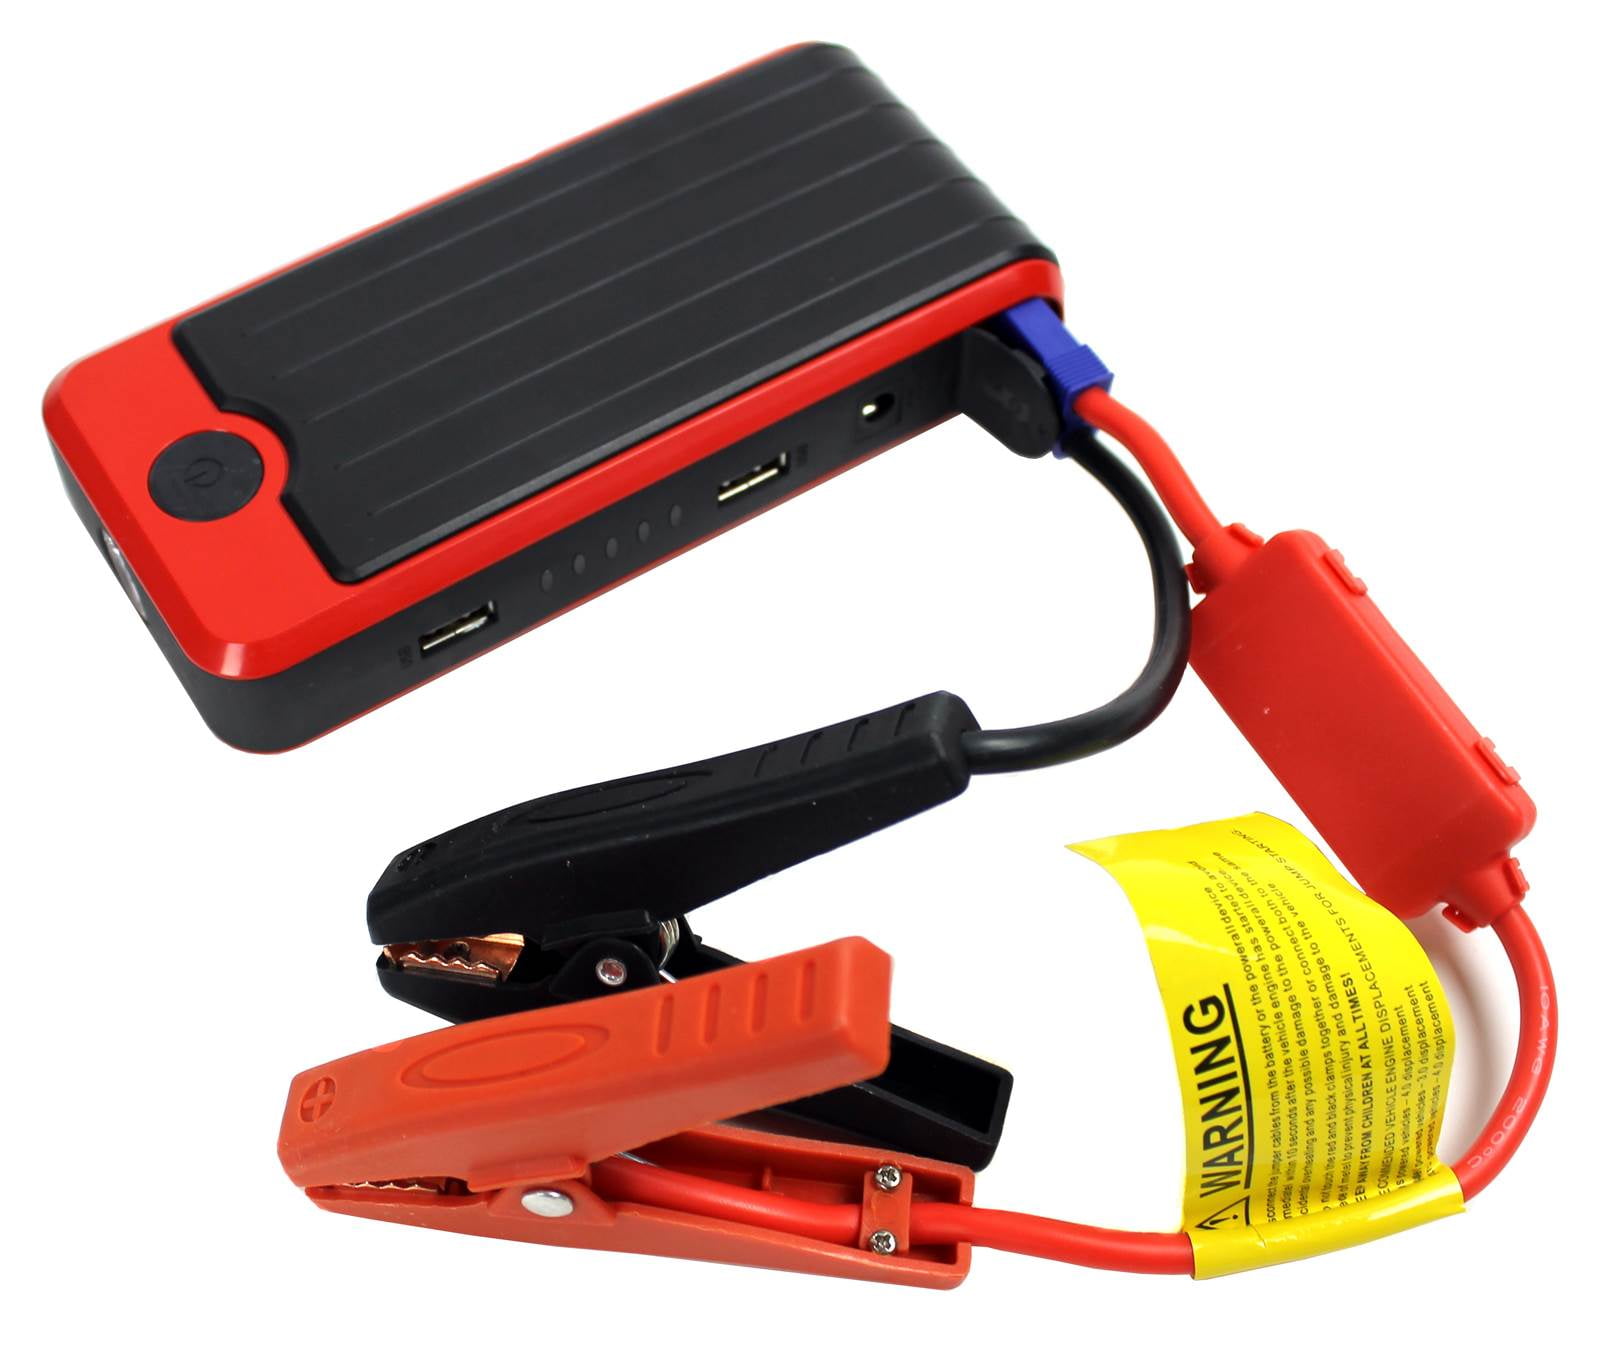 12V 400A Jump Starter Qi Wireless Power Bank Charging With Jump